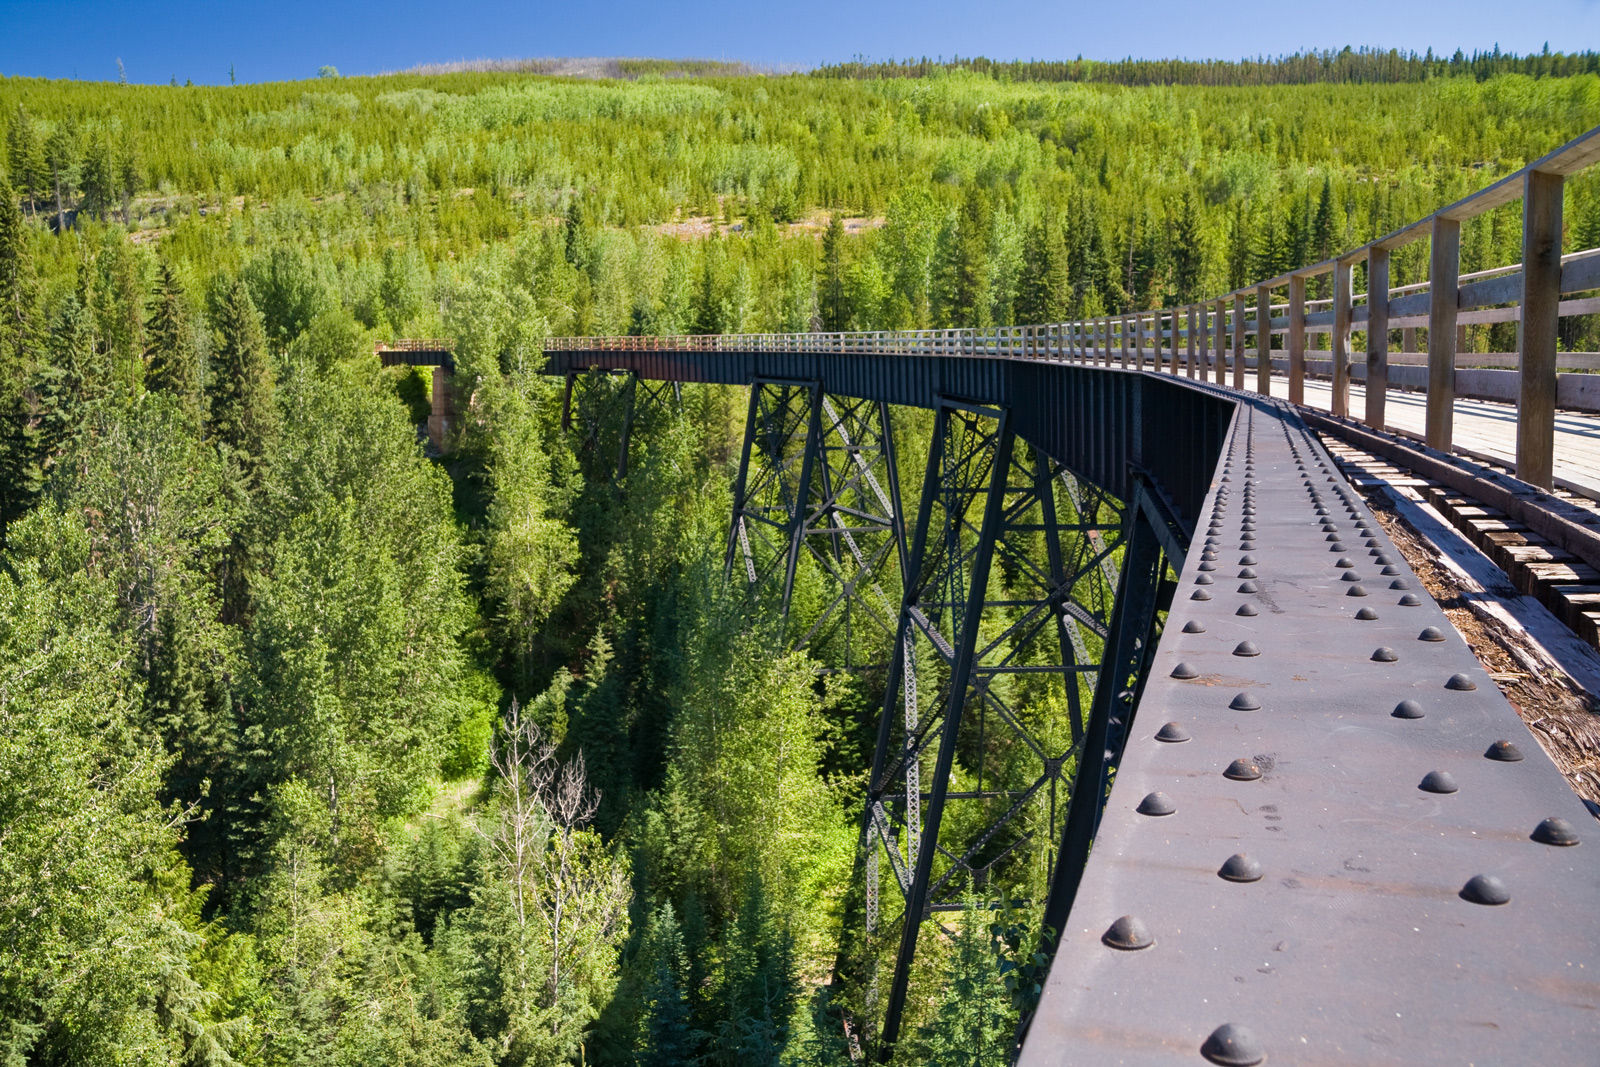 Visit local attractions such as the Kettle Valley Railway (KVR) when you stay at one of the best hotels in Kelowna on Highway 97.